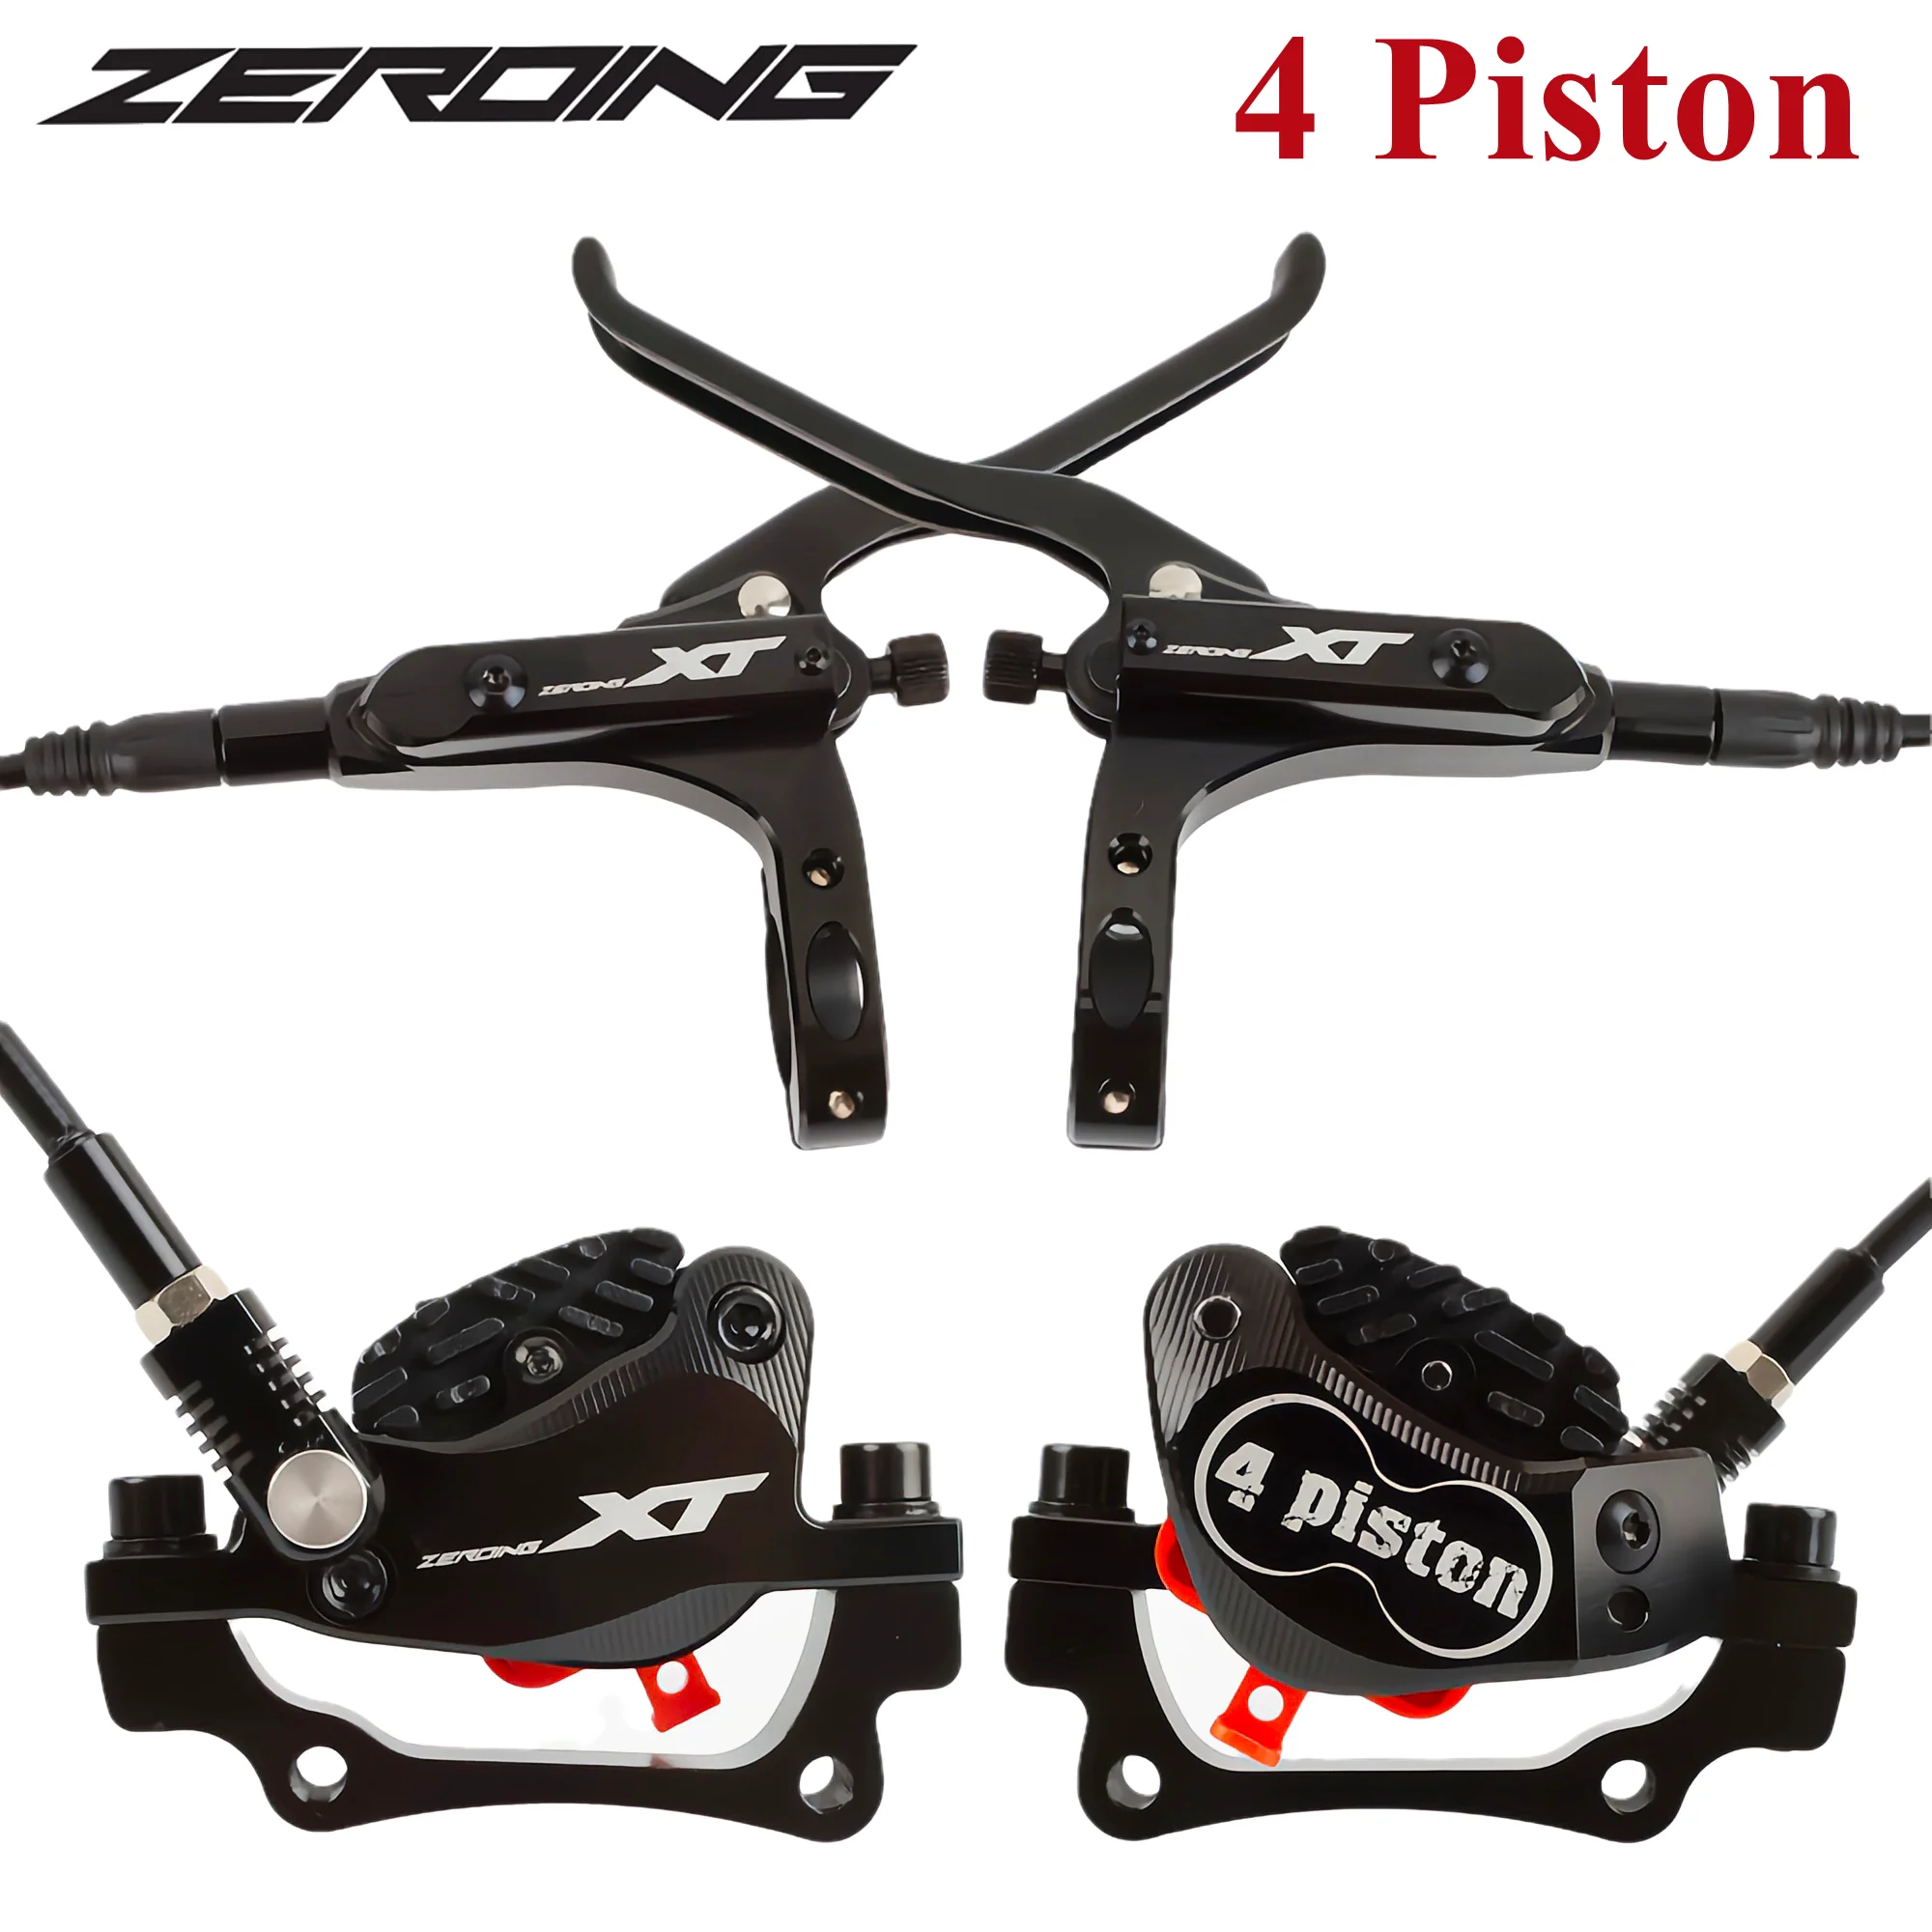 

ZEROING MTB 4 Piston Hydraulic Disc Brake XT With Cooling Full Meatal Pads CNC Tech Mineral Oil Brake For AM Enduro E4 ZEE MT200